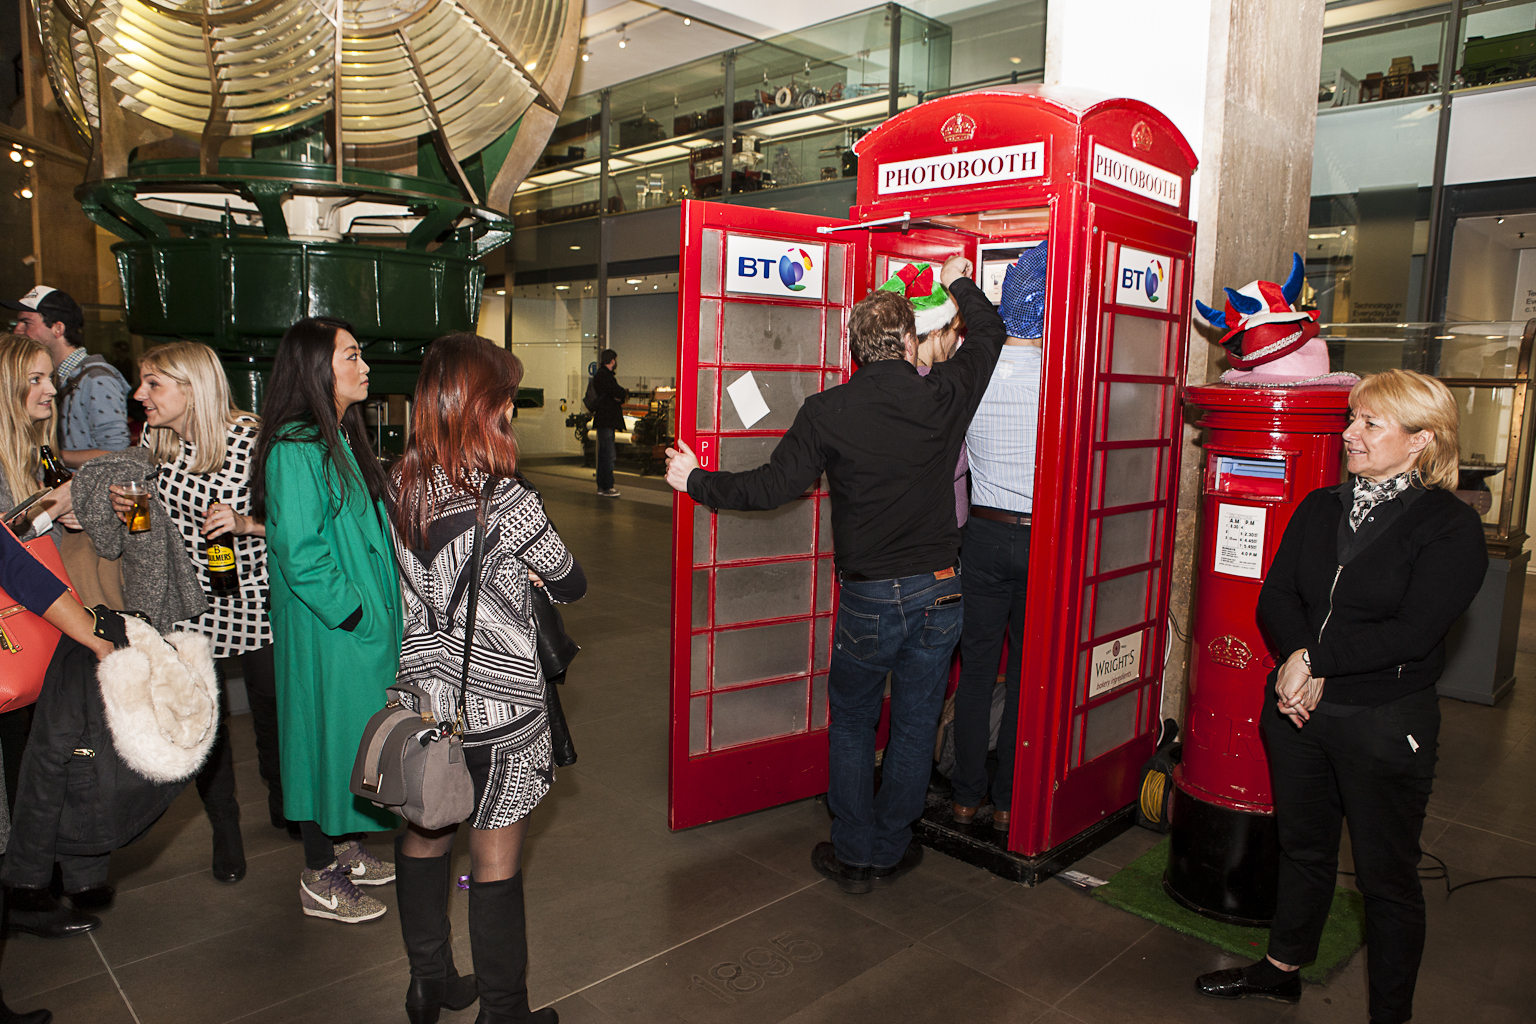 Visitors queue up to take part in BT's Phone Box Photo Booth. Image credit: Science Museum